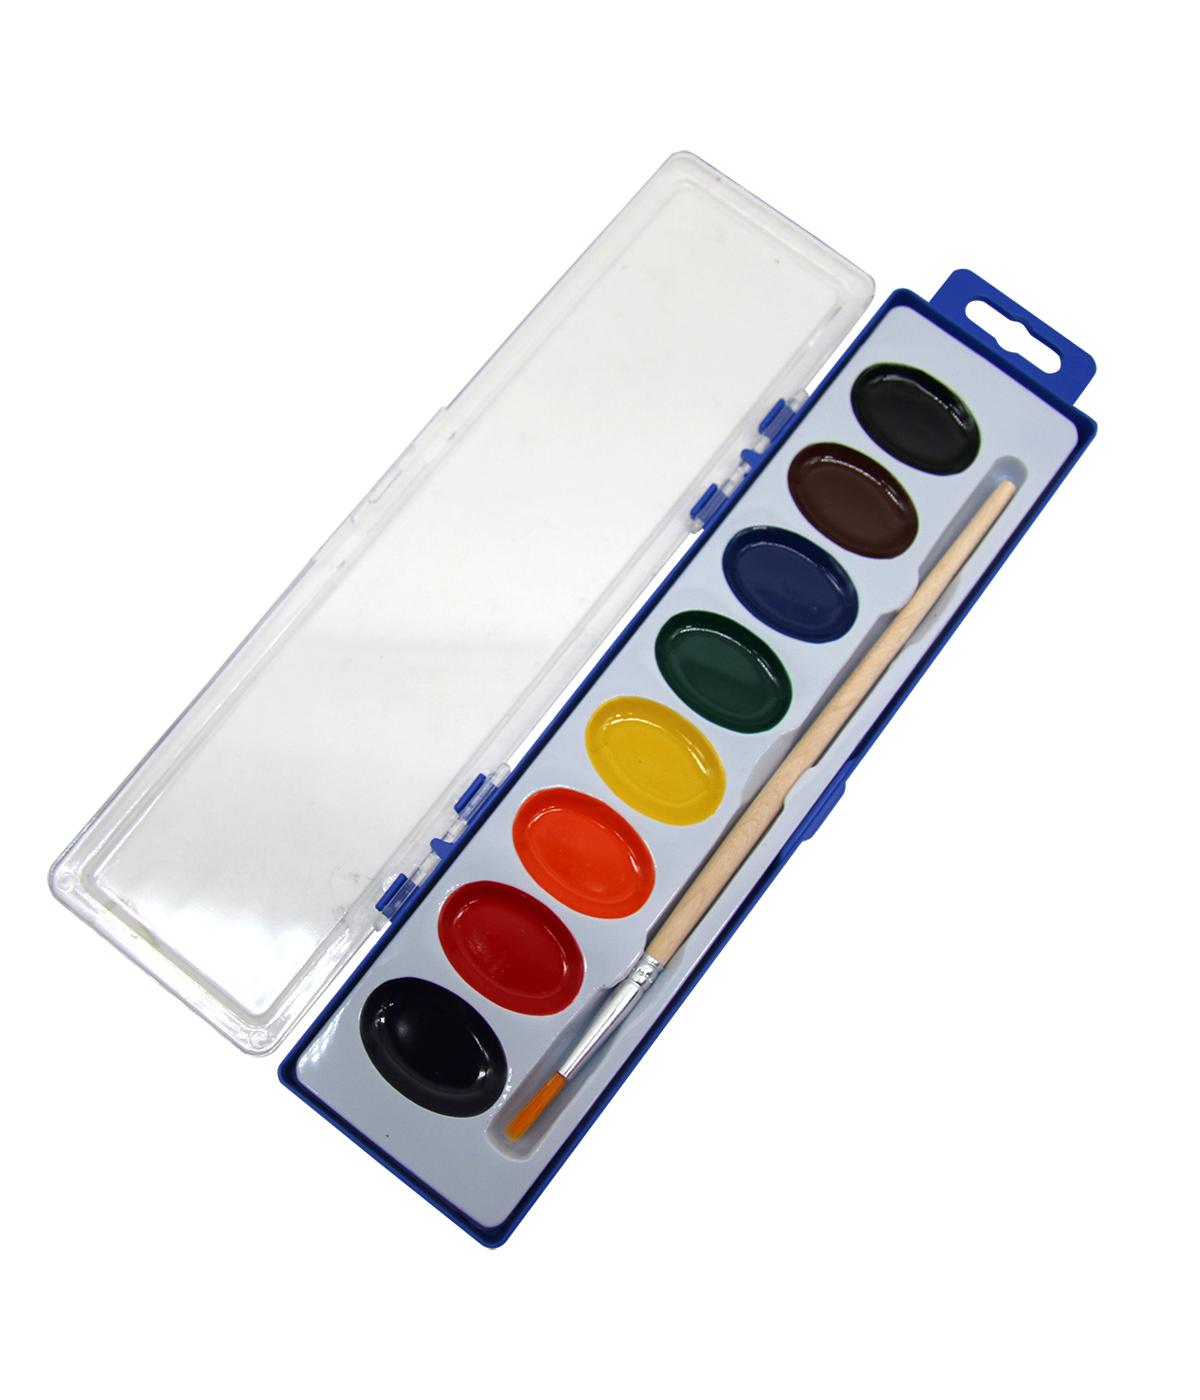 H-E-B Watercolors with Brush - 8 Color